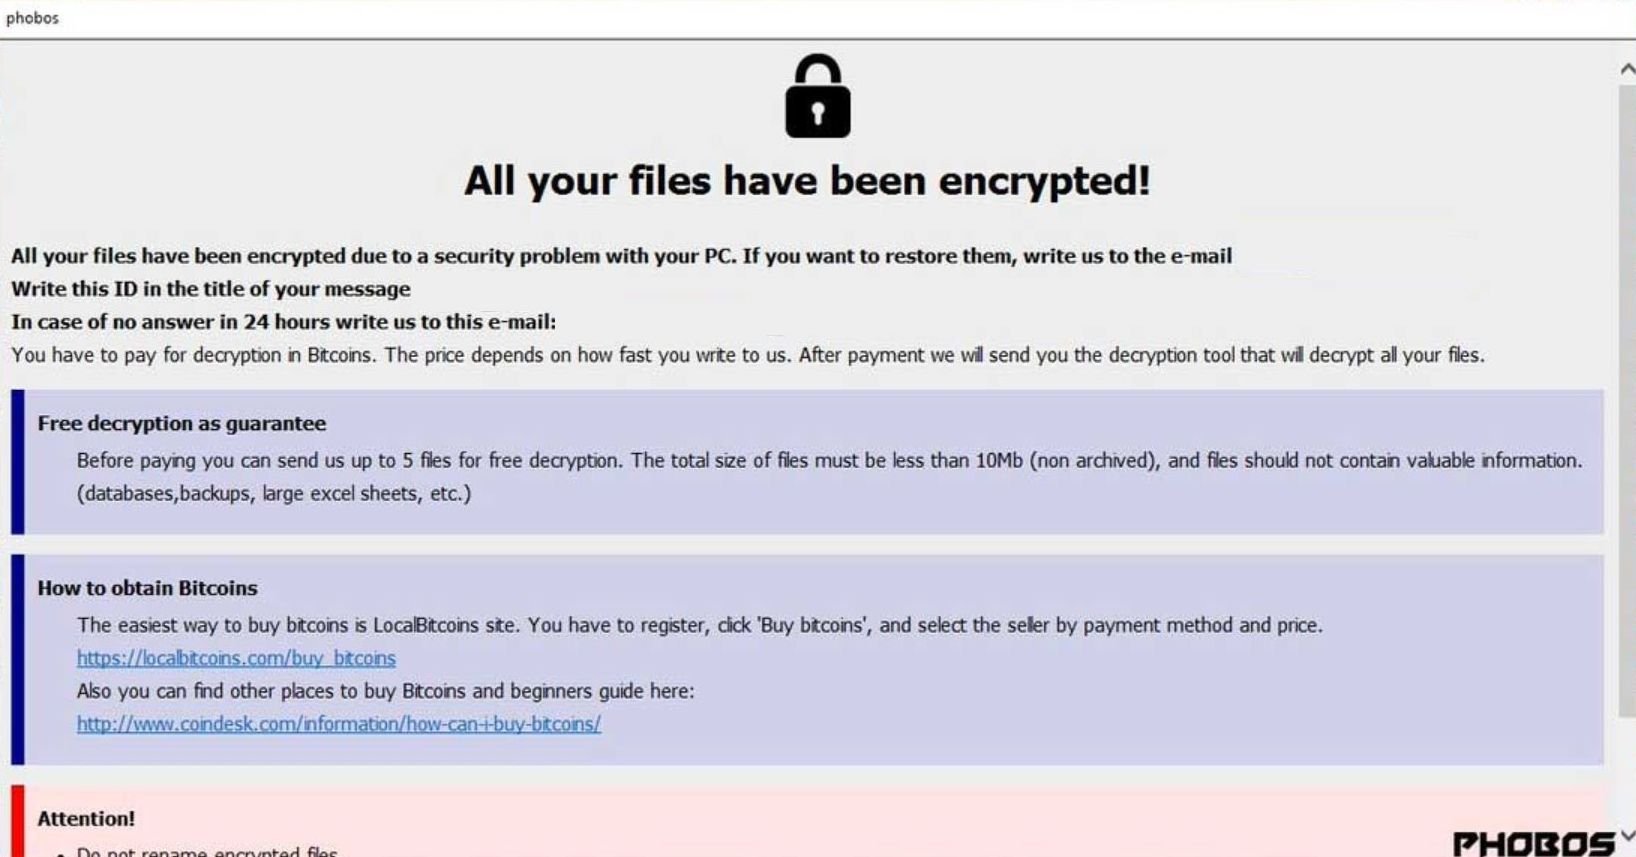 How To Remove Phobos Ransomware Virus Removal Guide - 